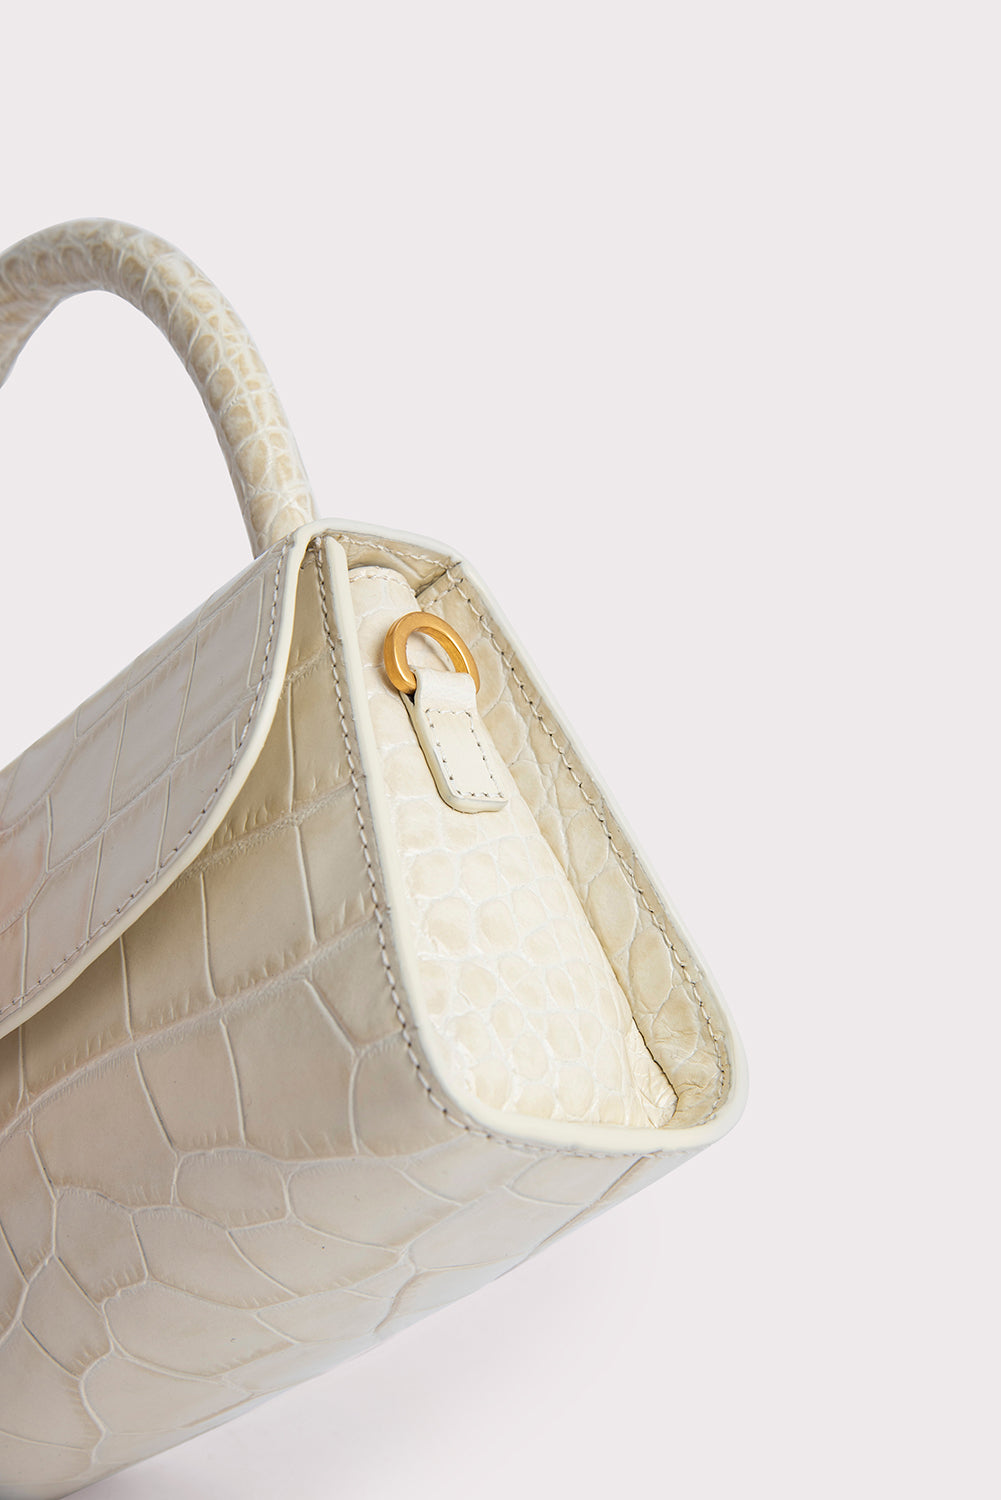 BY FAR Mini Croc-Embossed Leather Bag